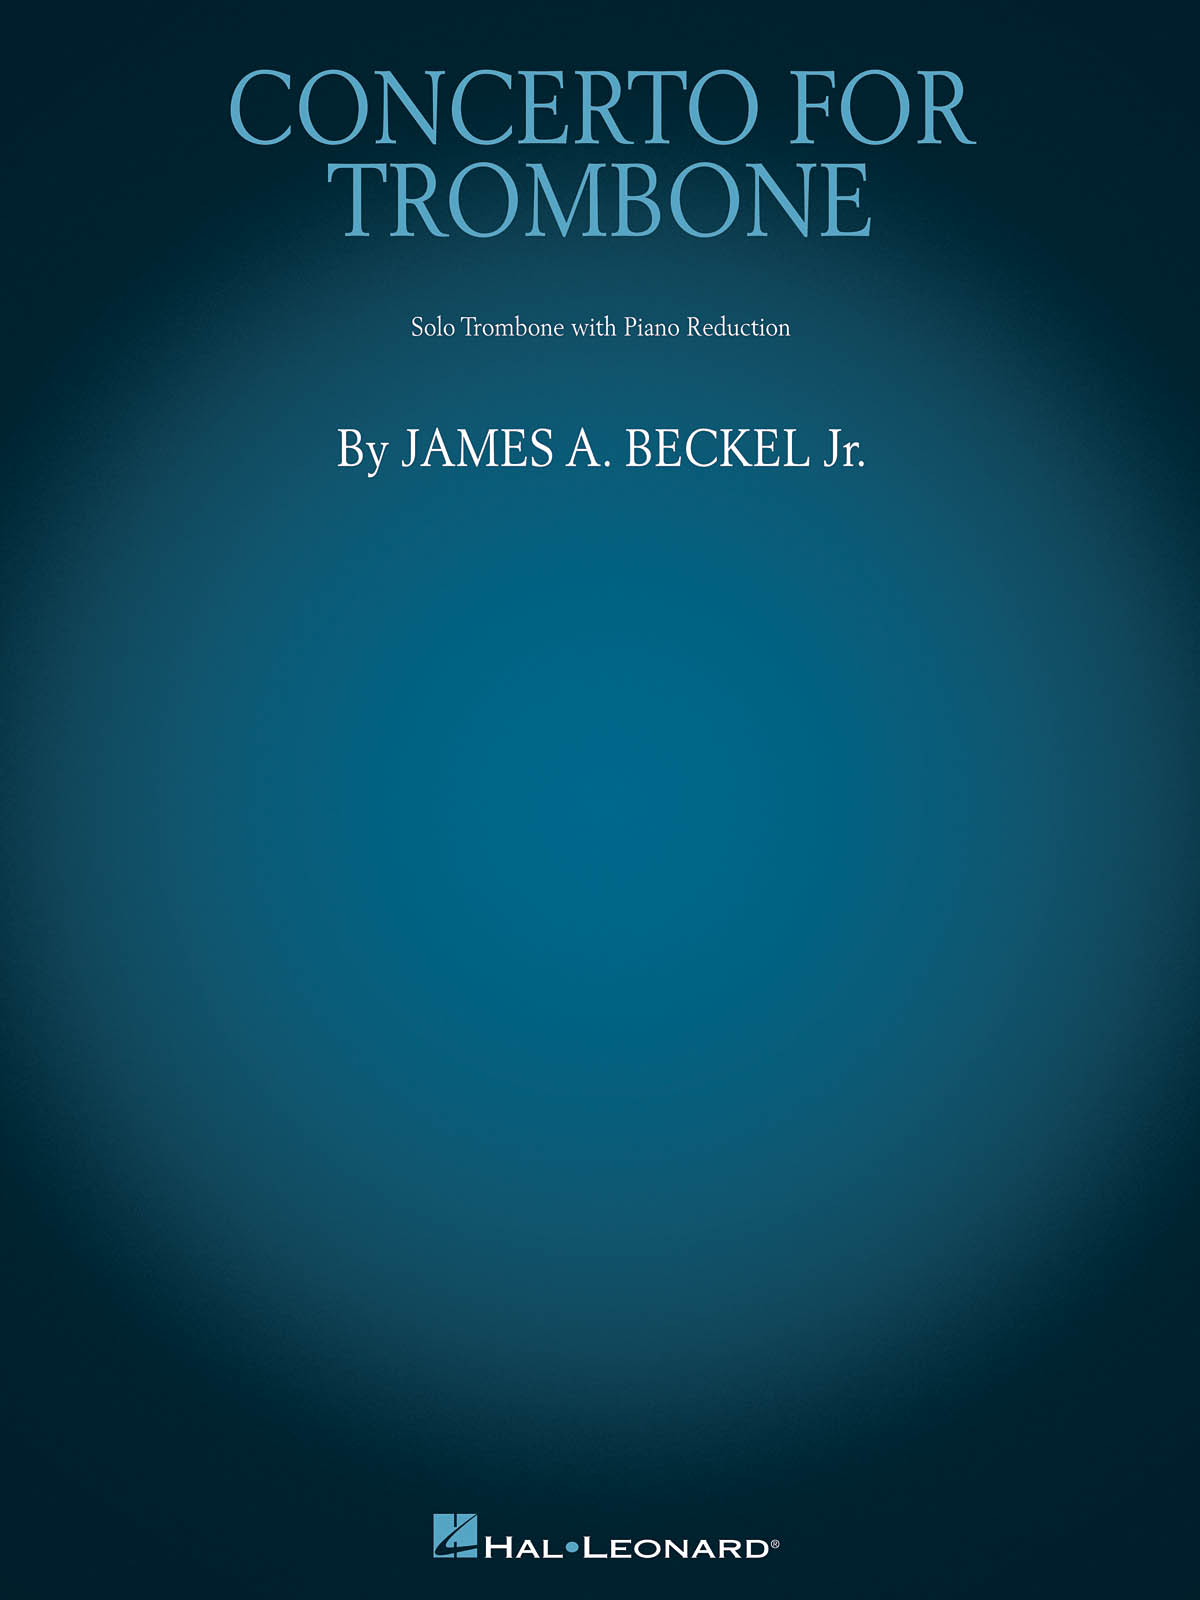 Concerto fuer Trombone(Trombone with Piano Reduction)